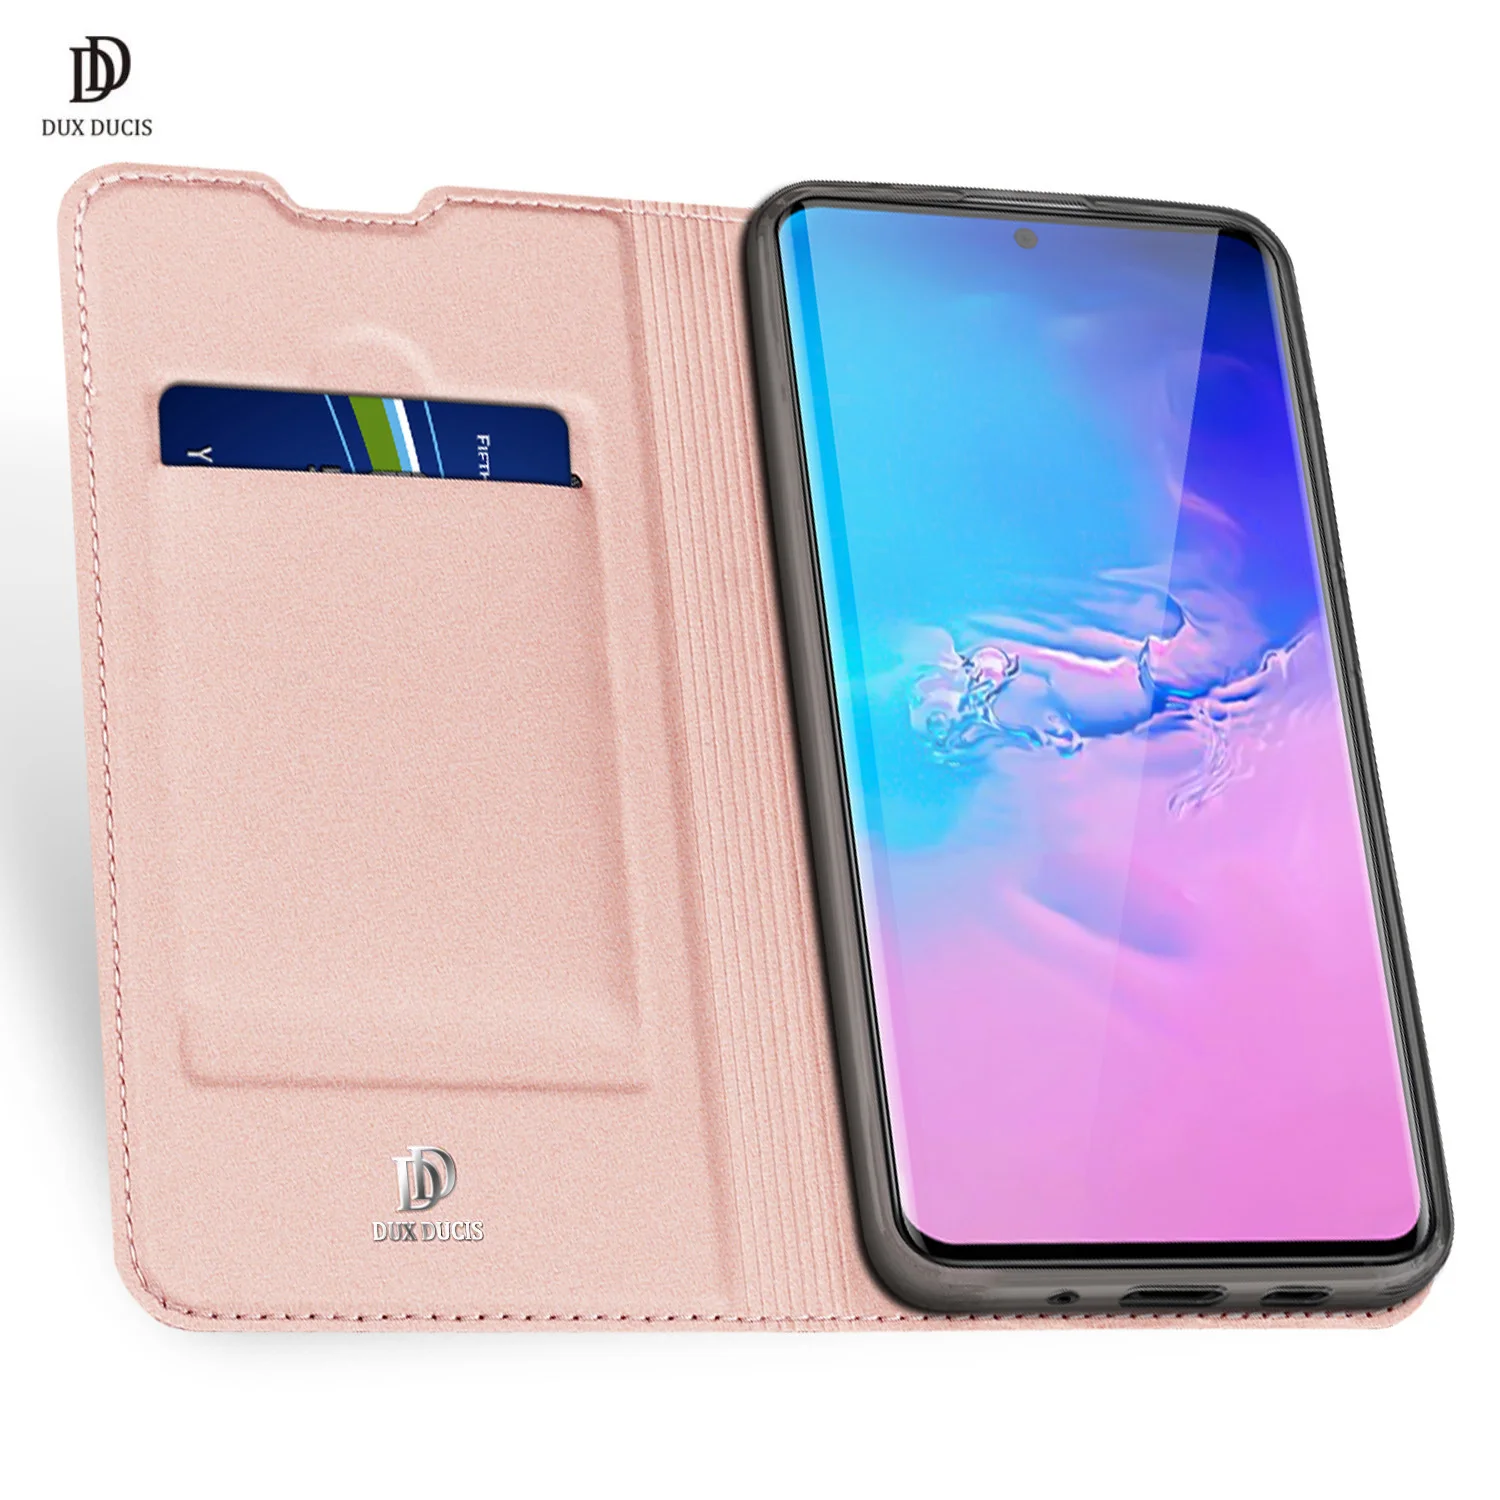 

For Samsung Galaxy S20 Ultra DUX DUCIS Skin Pro Series Leather Wallet Flip Case Full Protection Steady Stand Magnetic Closure